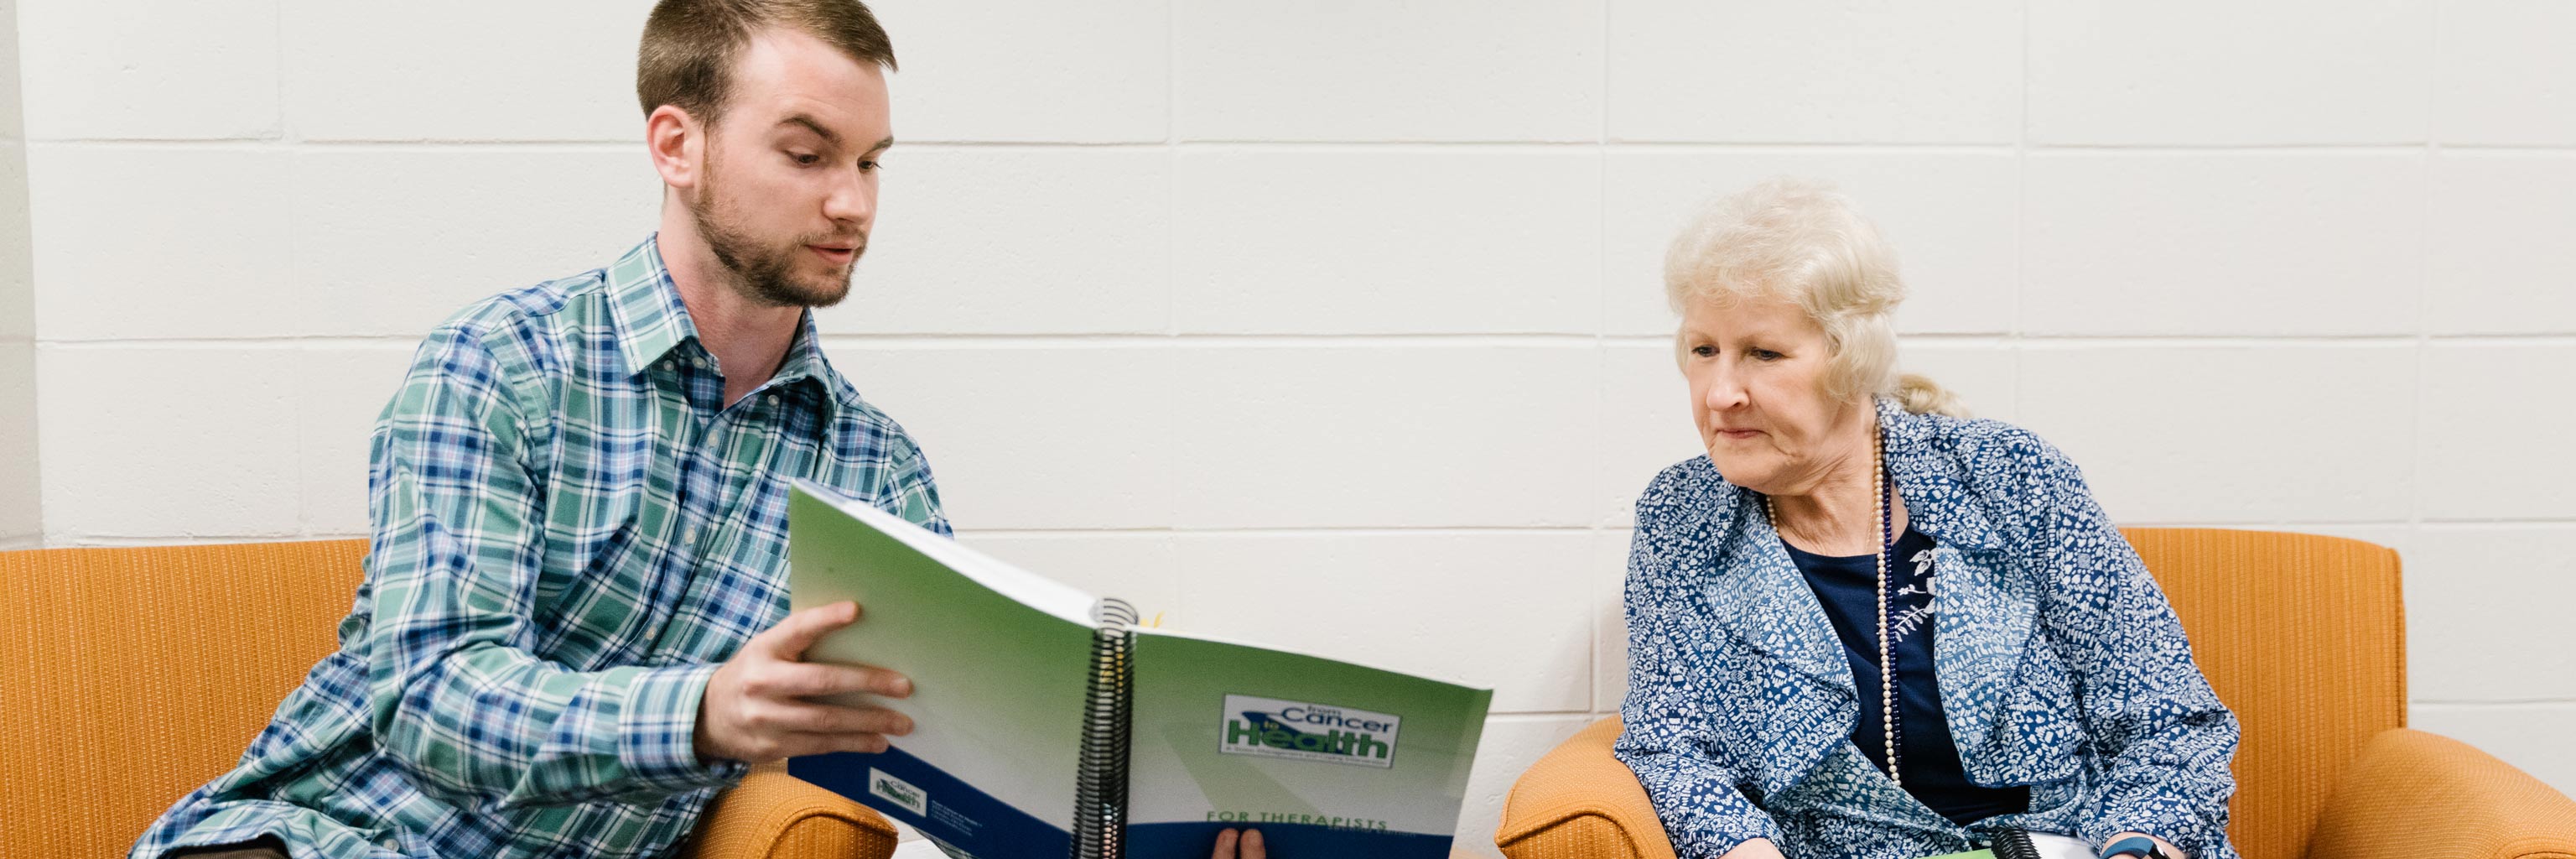 man showing an older lady a book